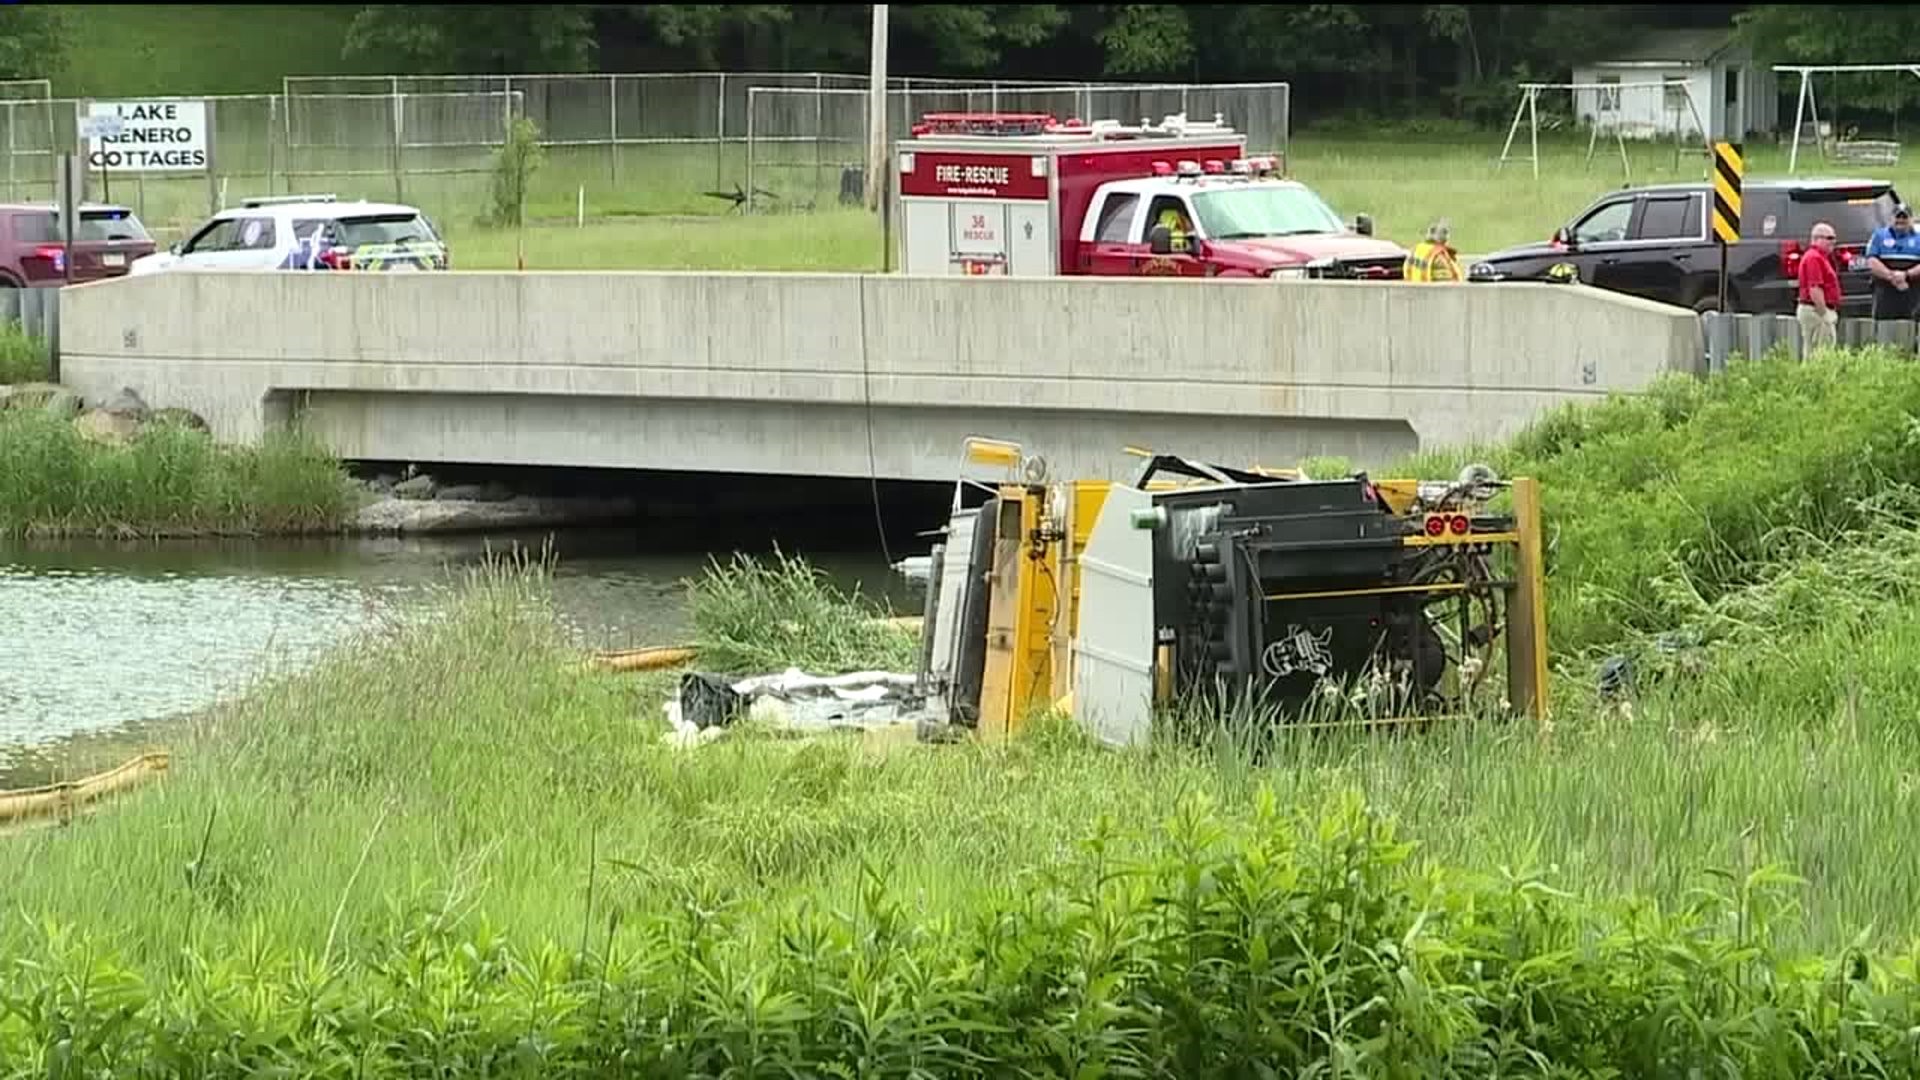 Paint Truck Crashes into Pond at The Hideout in Wayne County